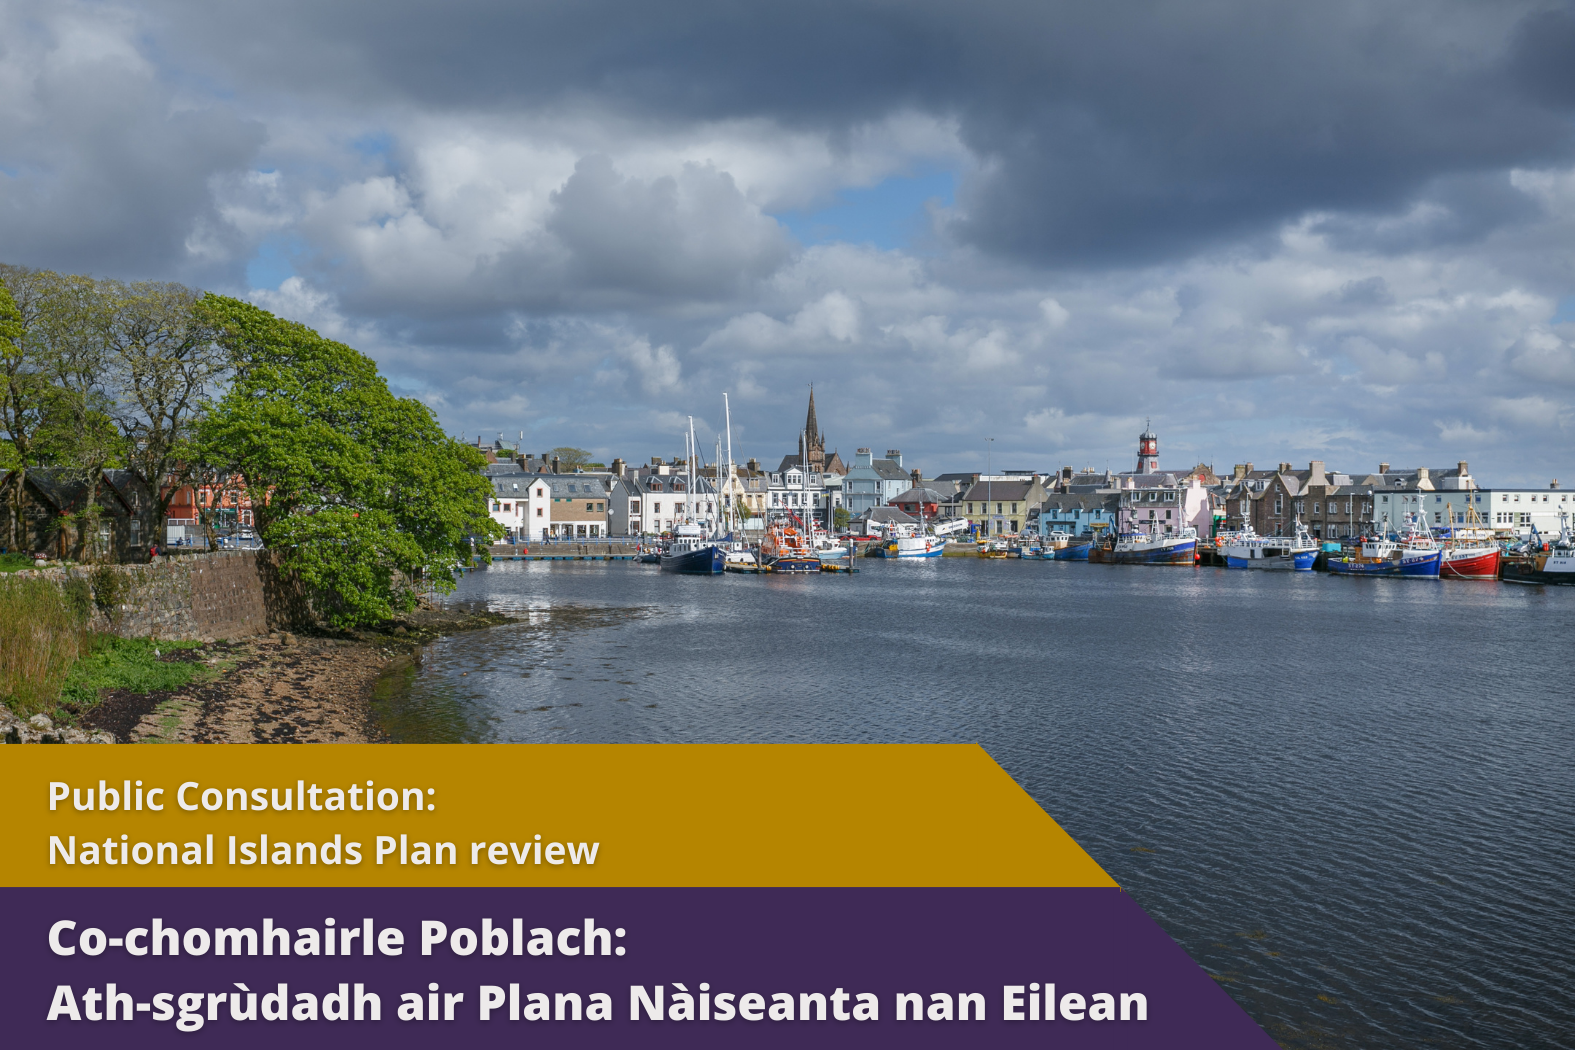 Picture: Boats in front of Stornoway, Lewis with text over picture. Text reads 'Consultation Response: National Islands Plan Review'